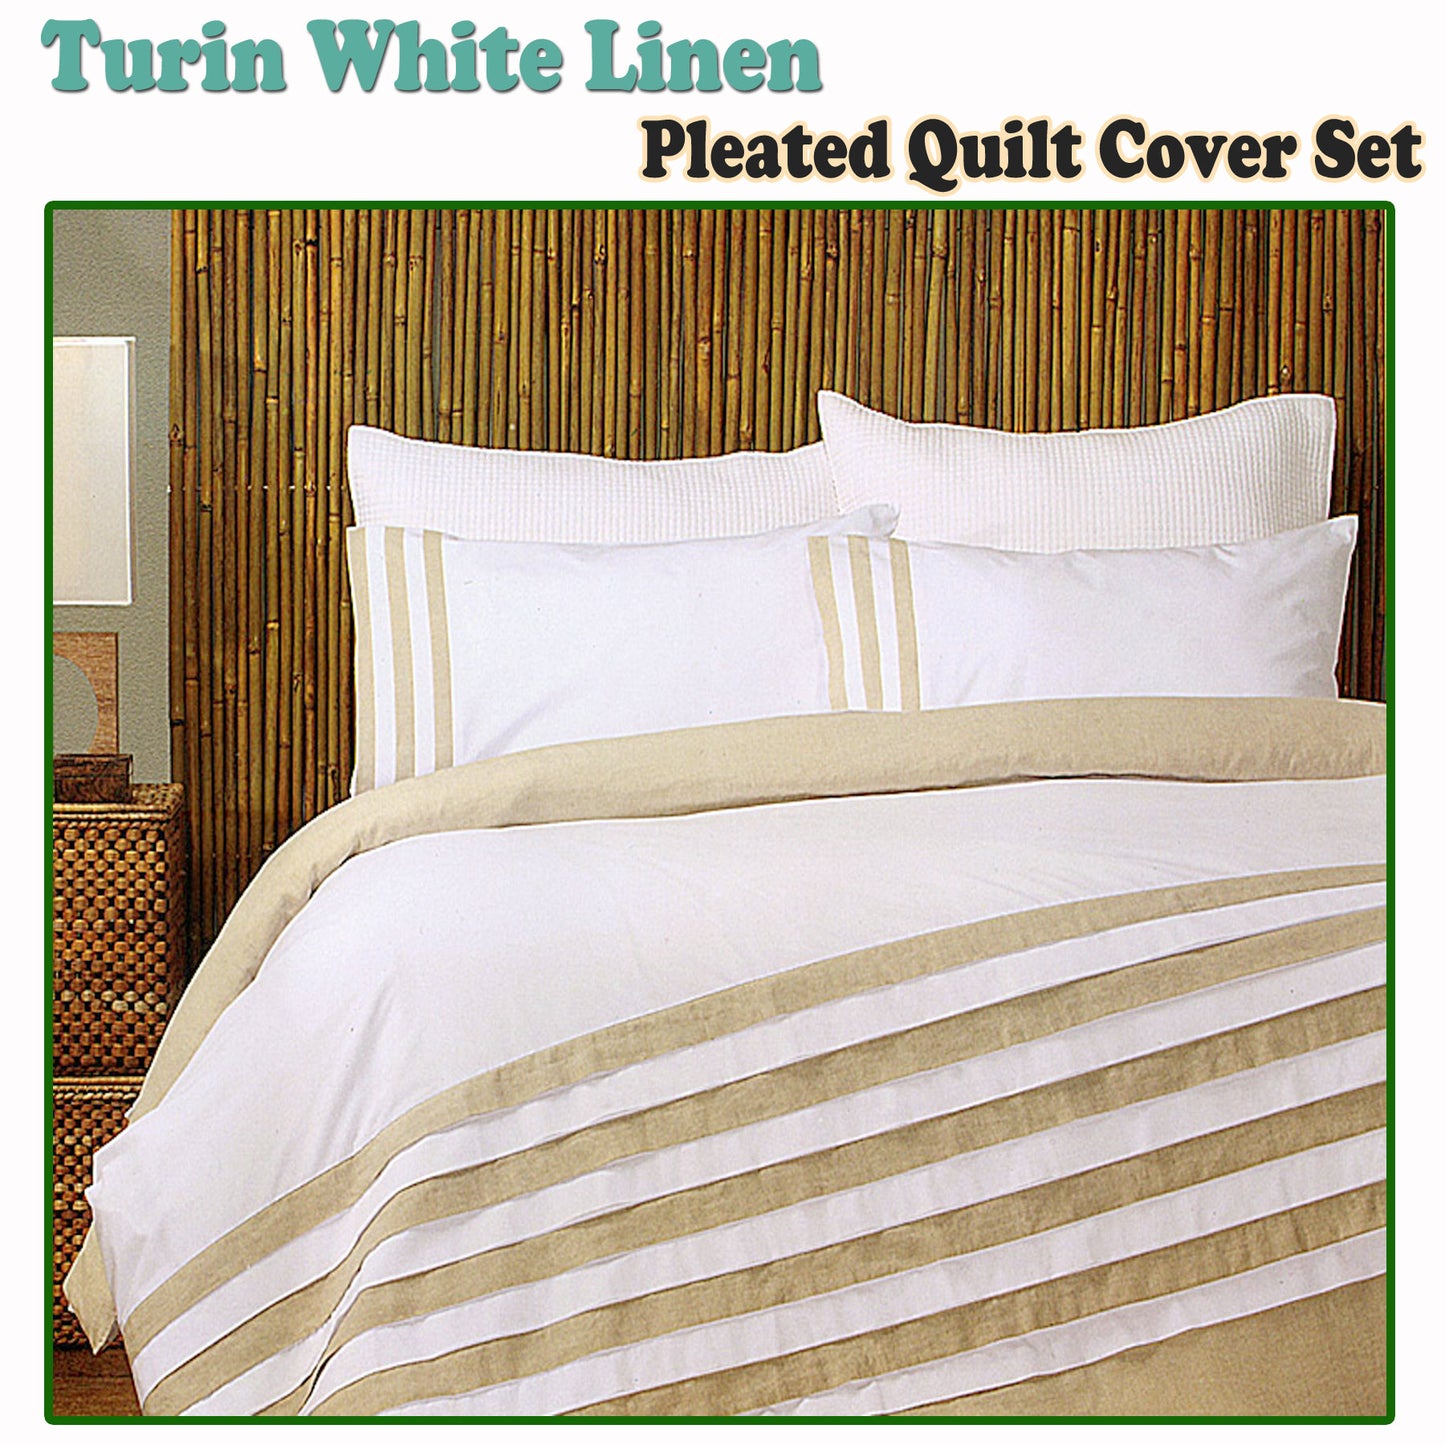 Queen Turin White Linen Quilt Cover Set